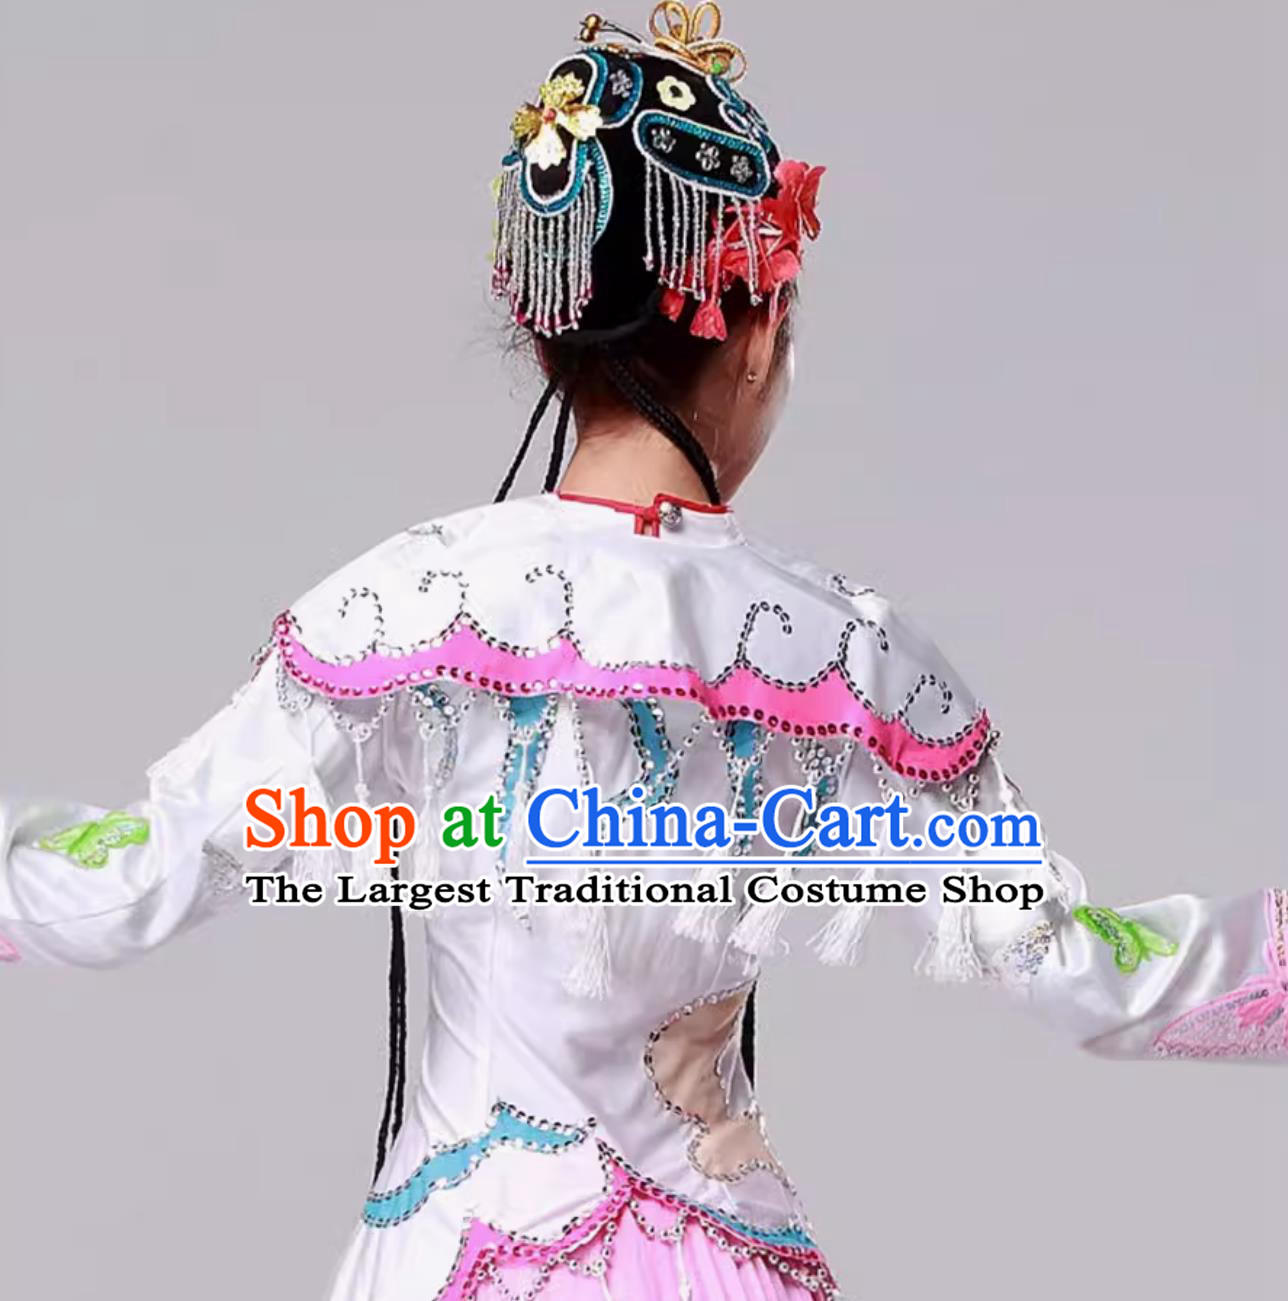 Traditional Chinese Opera Costume Women Ancient Clothing Beijing Opera Hua Tan Liang Zhu Performance Dress A Hundred Flowers Competing For Beauty Water Sleeve Dance Garment